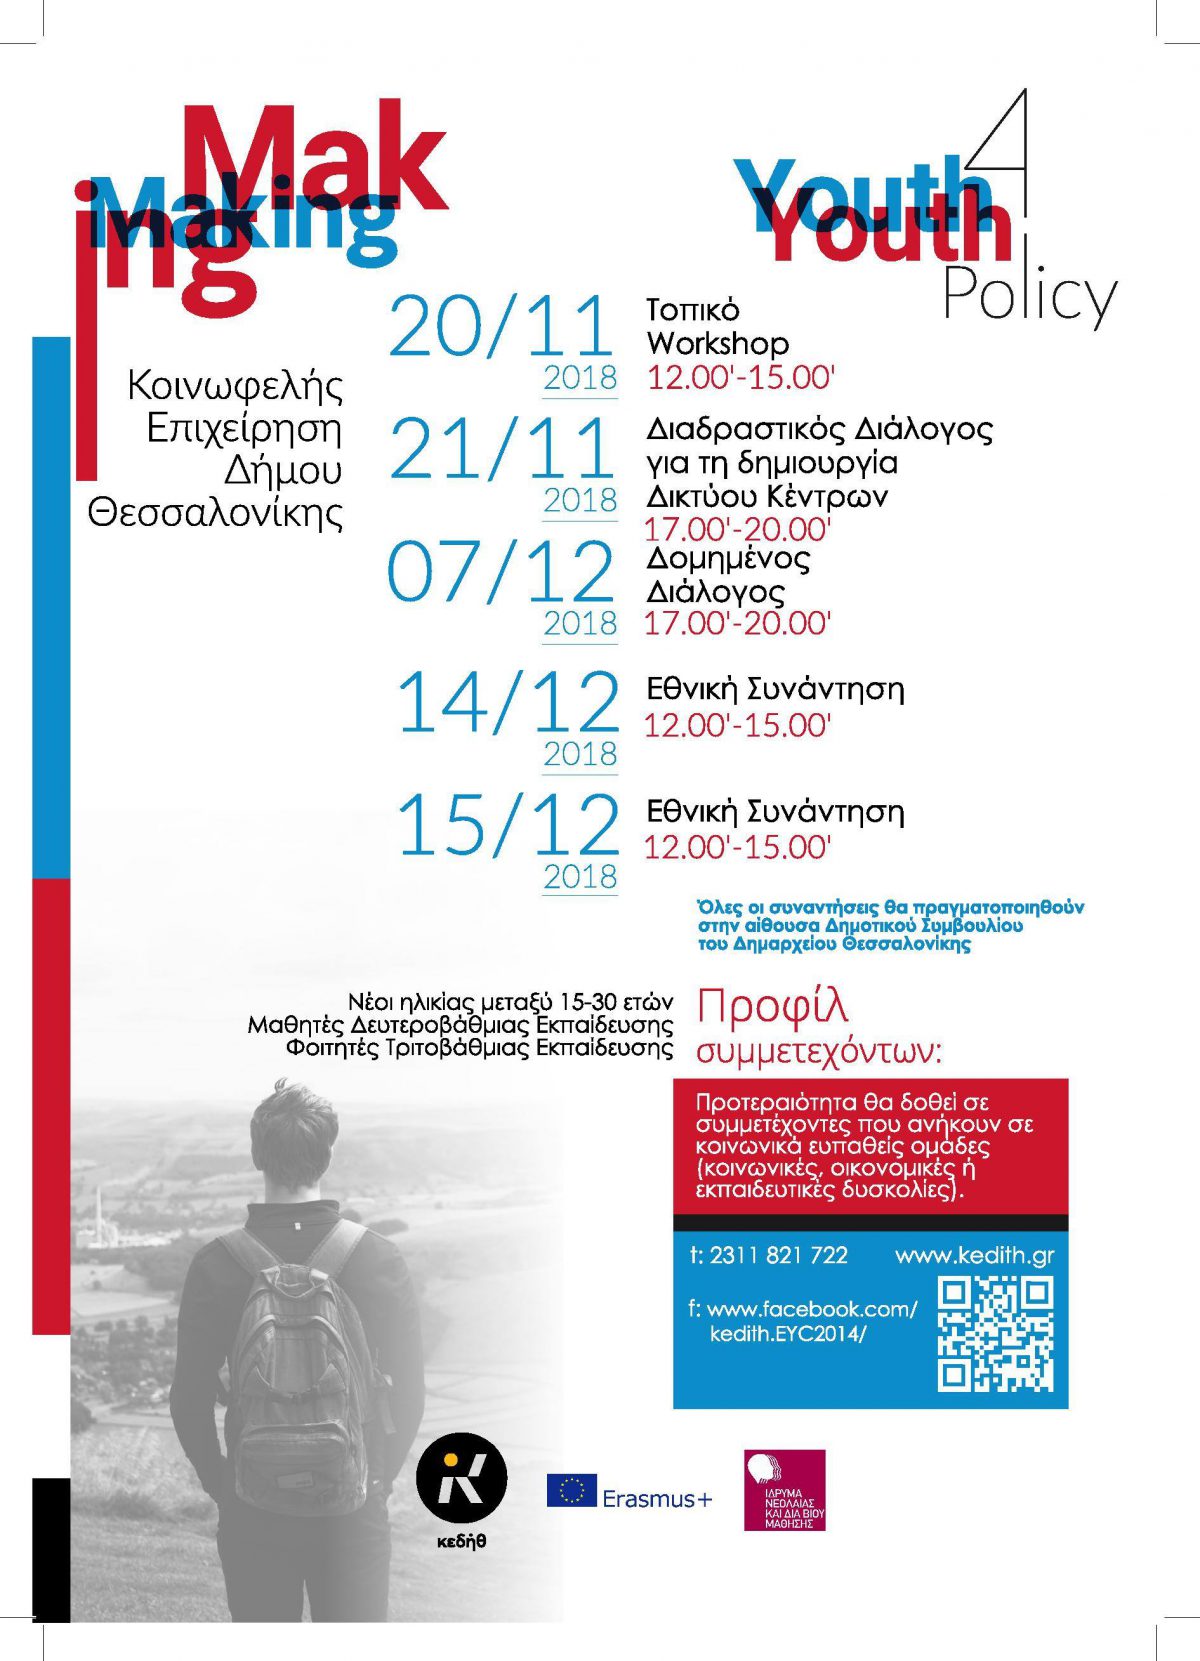 Making Youth Policy 1200x1661 1 2